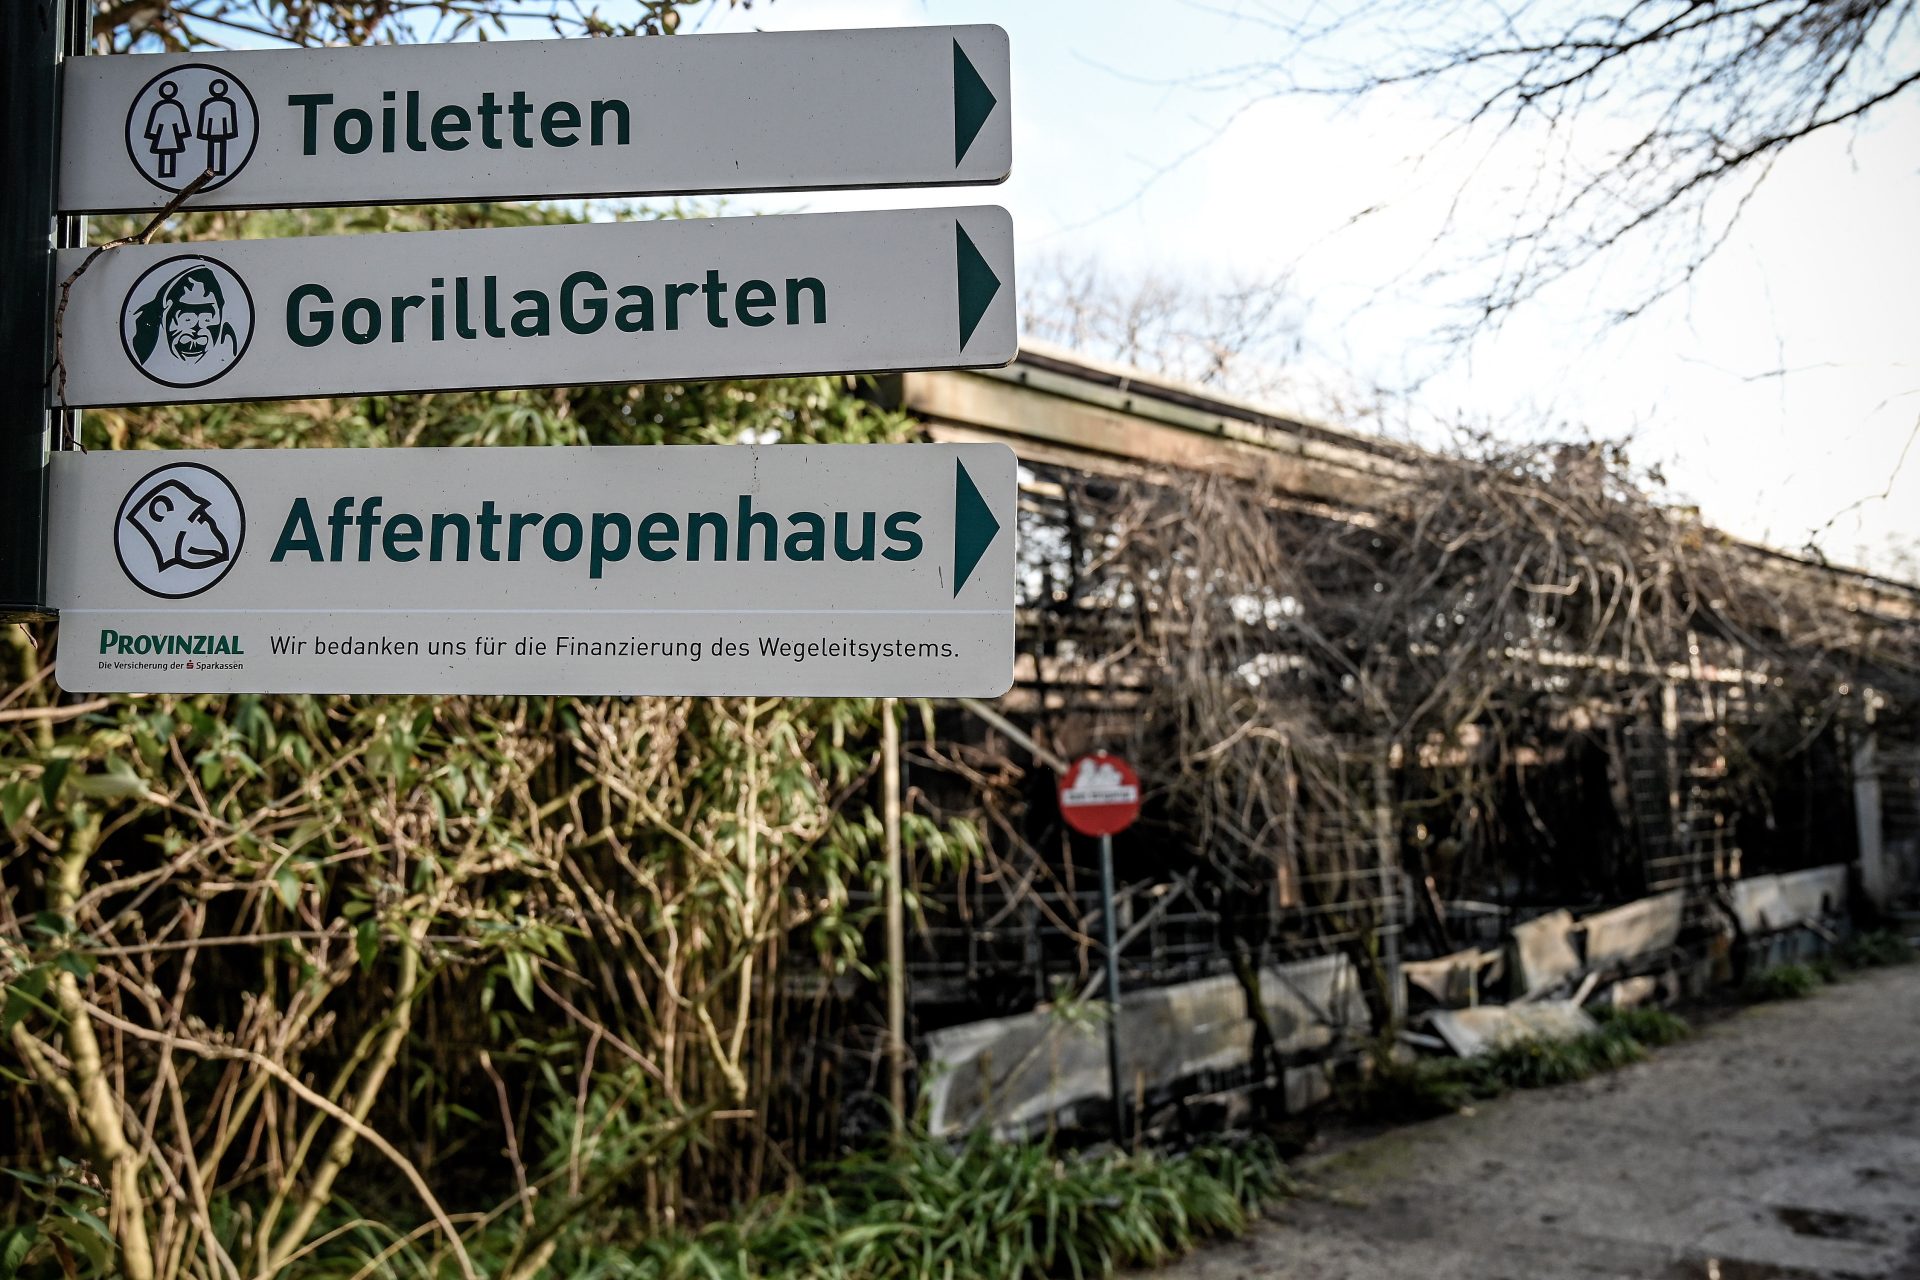 More than 30 animals die during a fire at the Krefeld Zoo in the New Year's night